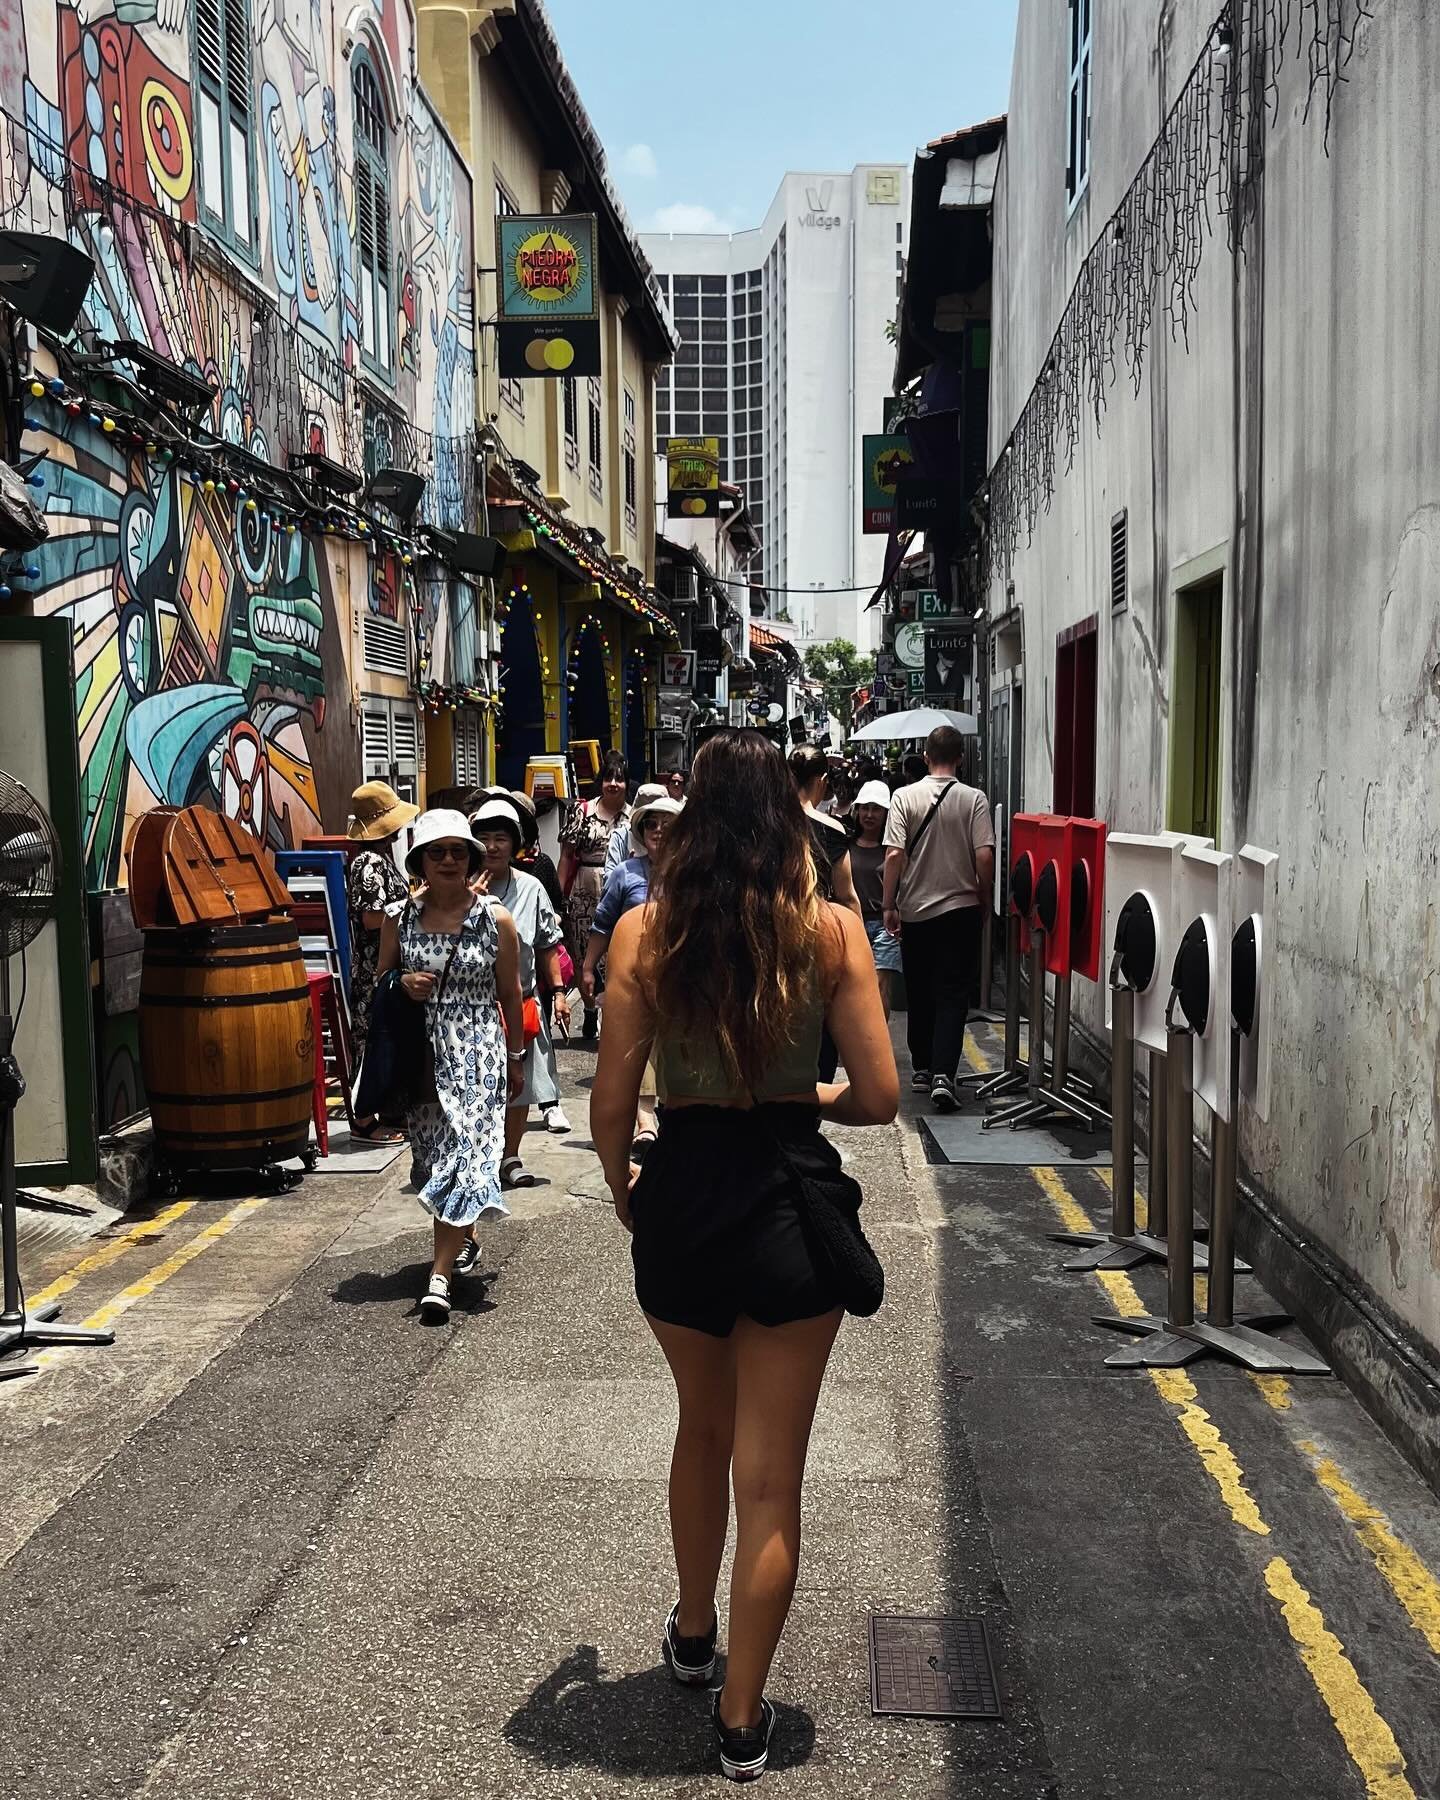 S I N G A P O R E 🇸🇬 &lsquo;24

1. Haji Lane strolls 👟
2. Telok Ayer St - Chinatown (great foodie street) 🍷
3. Sultan Mosque - Kampong Glam 🕌
4. Raffles &amp; Ranges 💸
5. Lau Pa Sat - Hawker market 🍜
6. Singapores finest 🥢
7. Haji by night 🕺